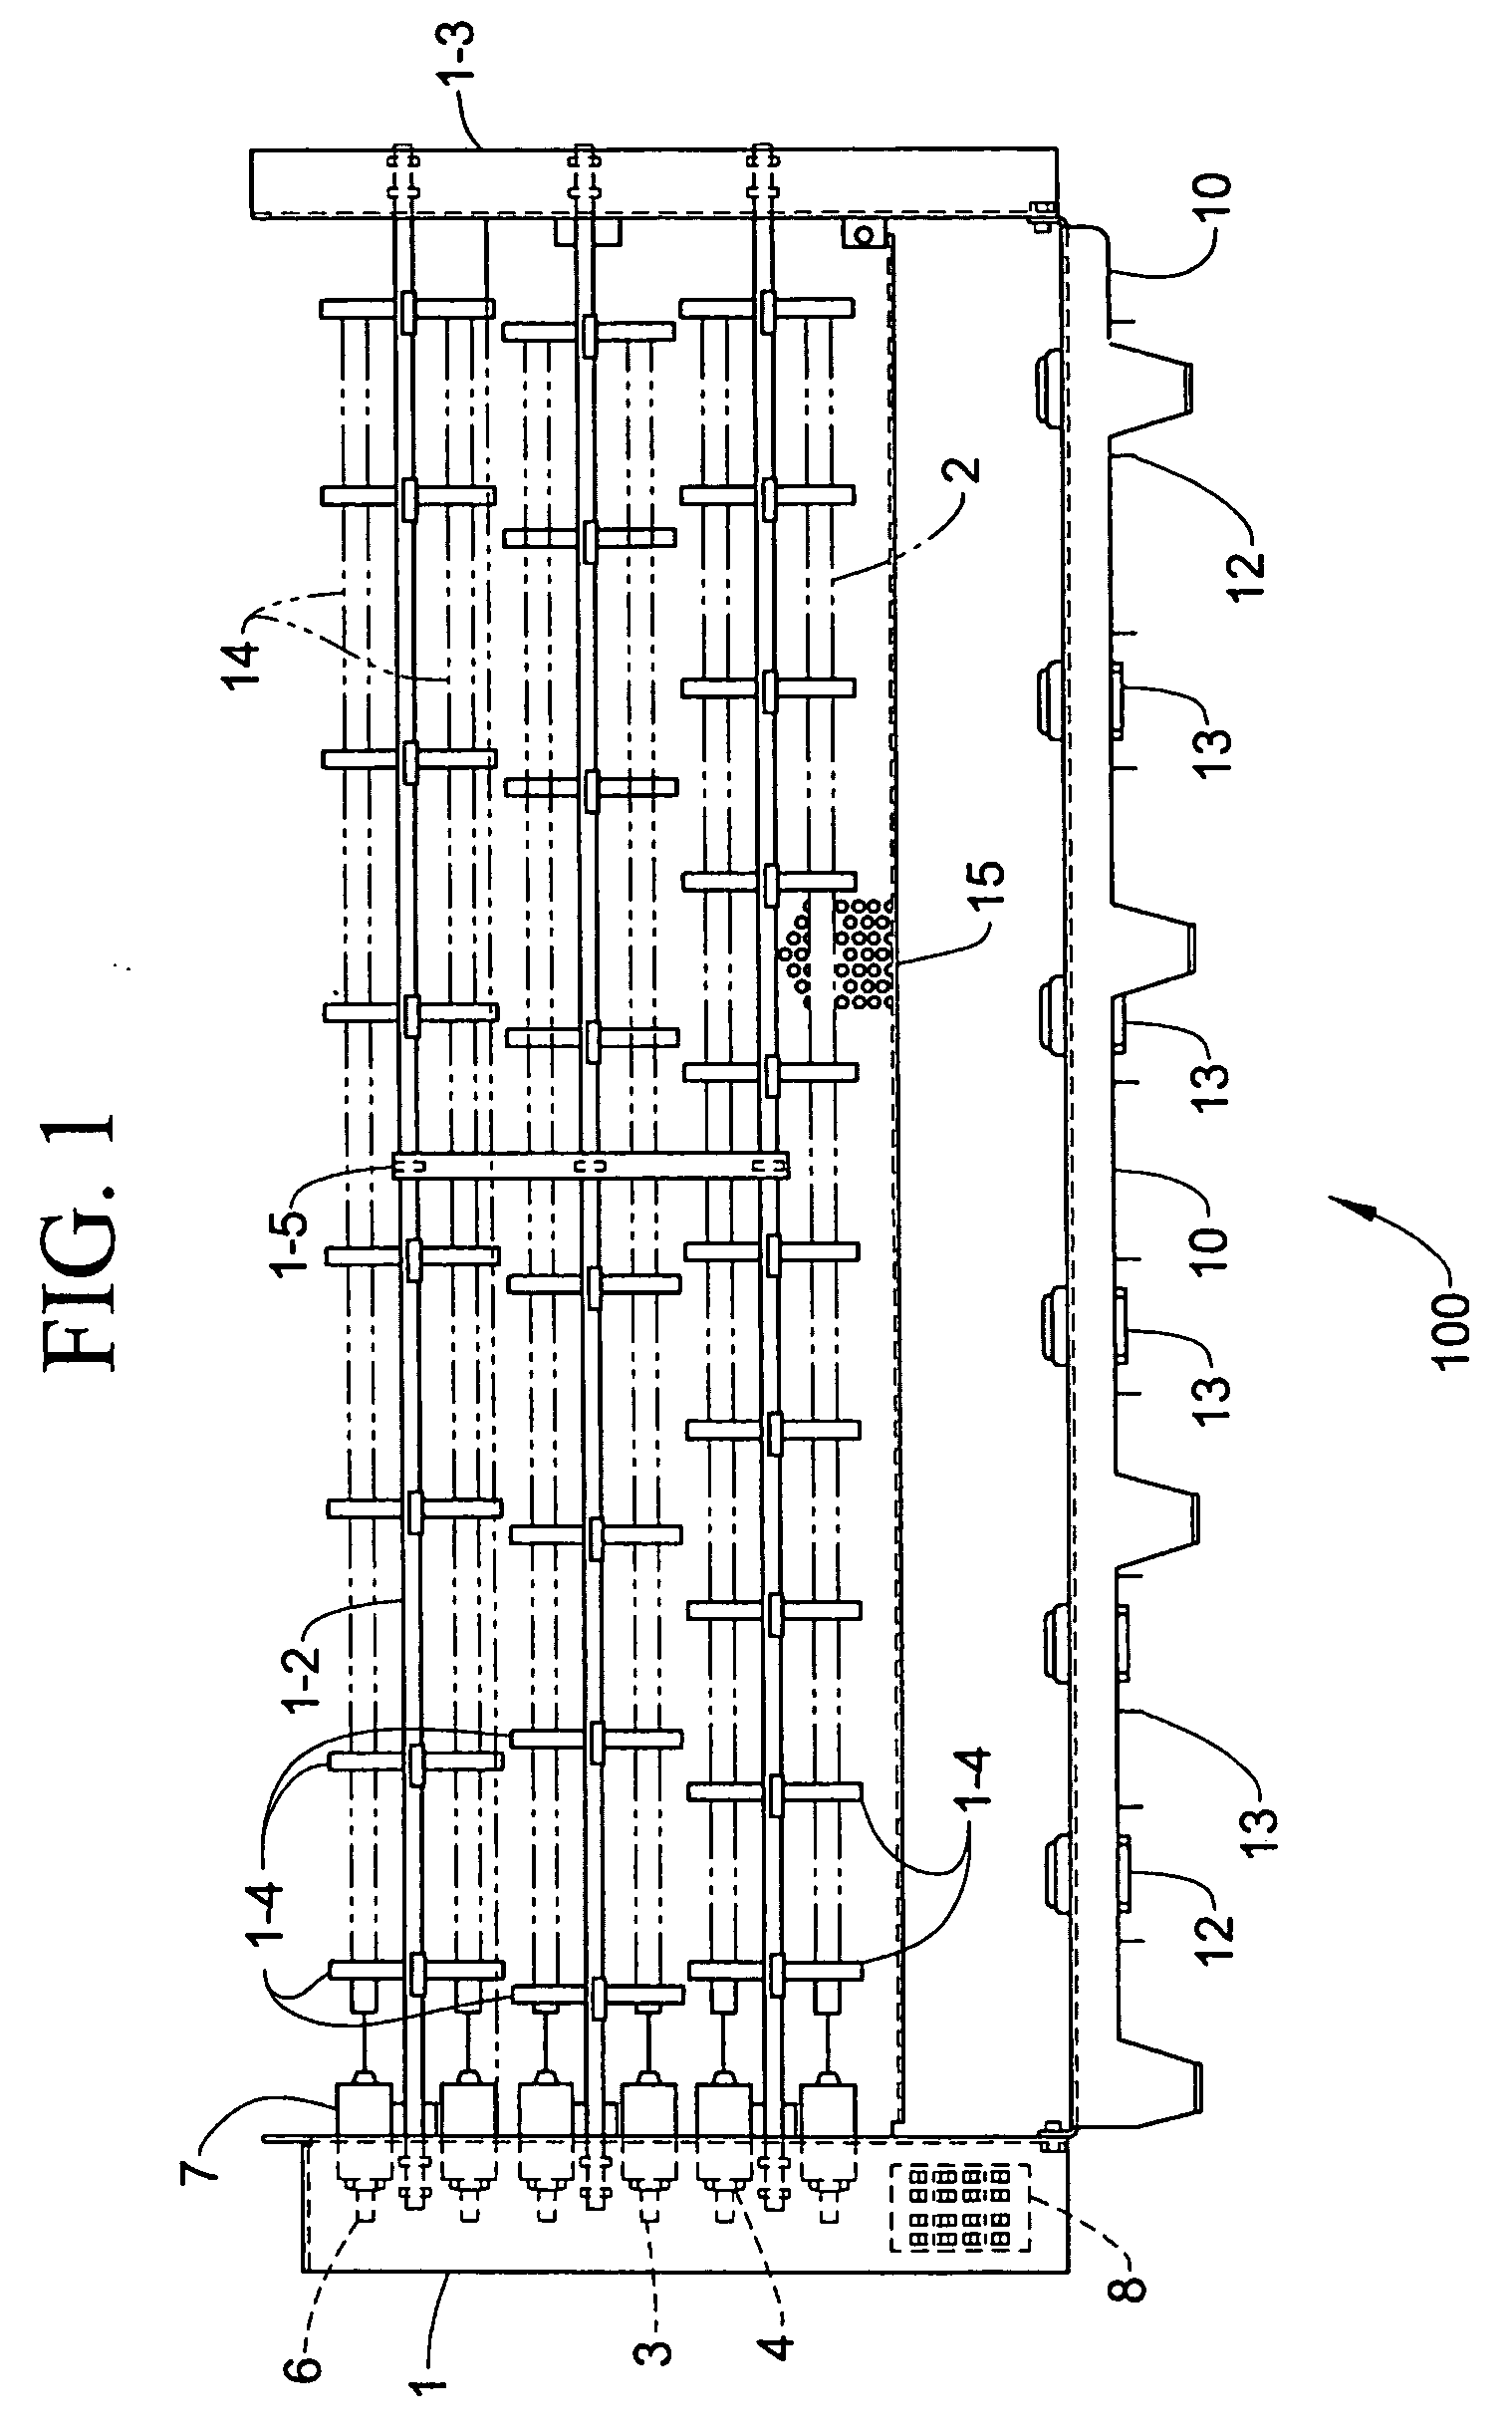 Heating or heating and air conditioning unit with noise abatement feature and method of use